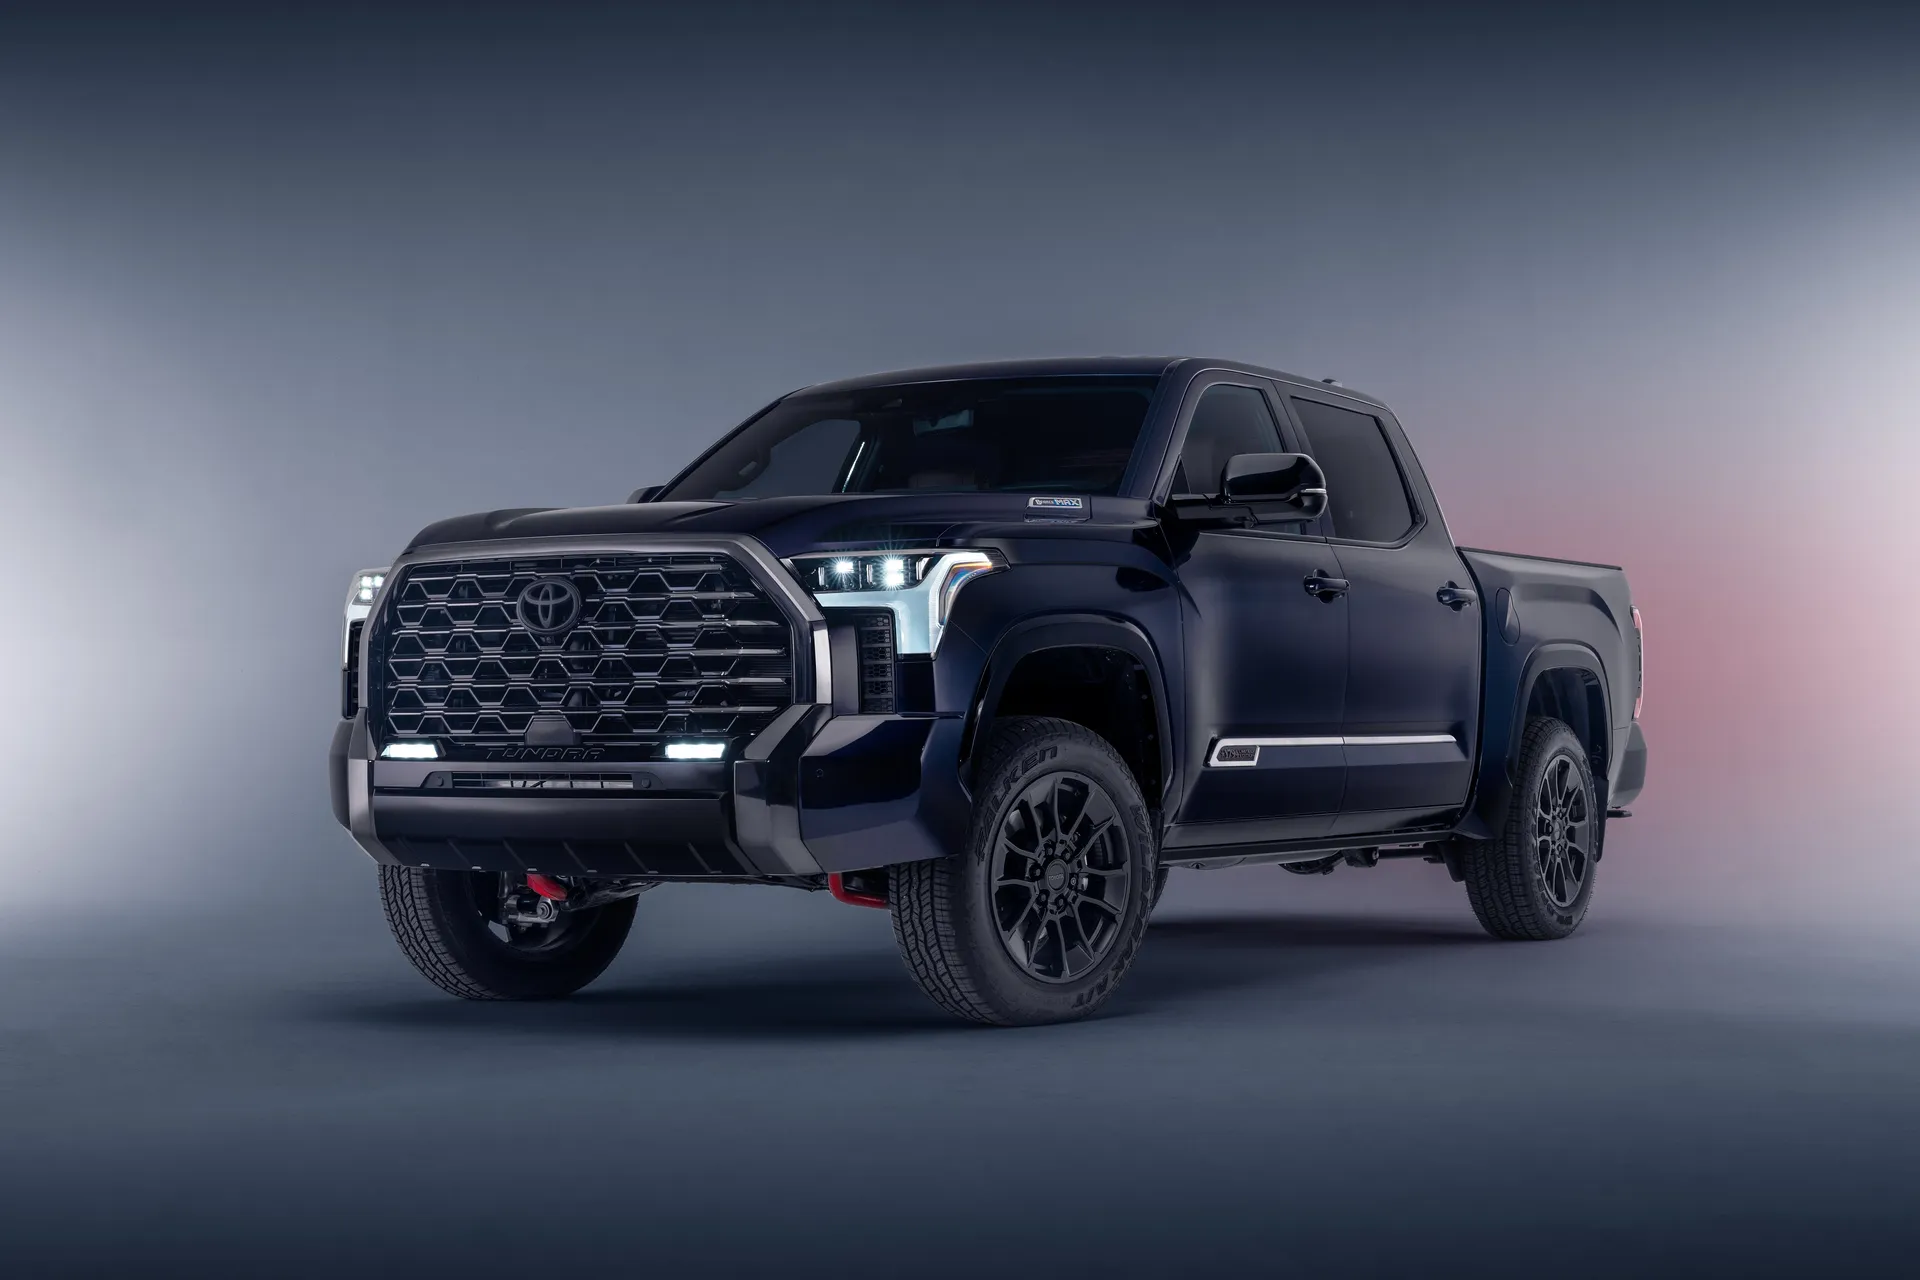 Front View of the new Toyota Tundra